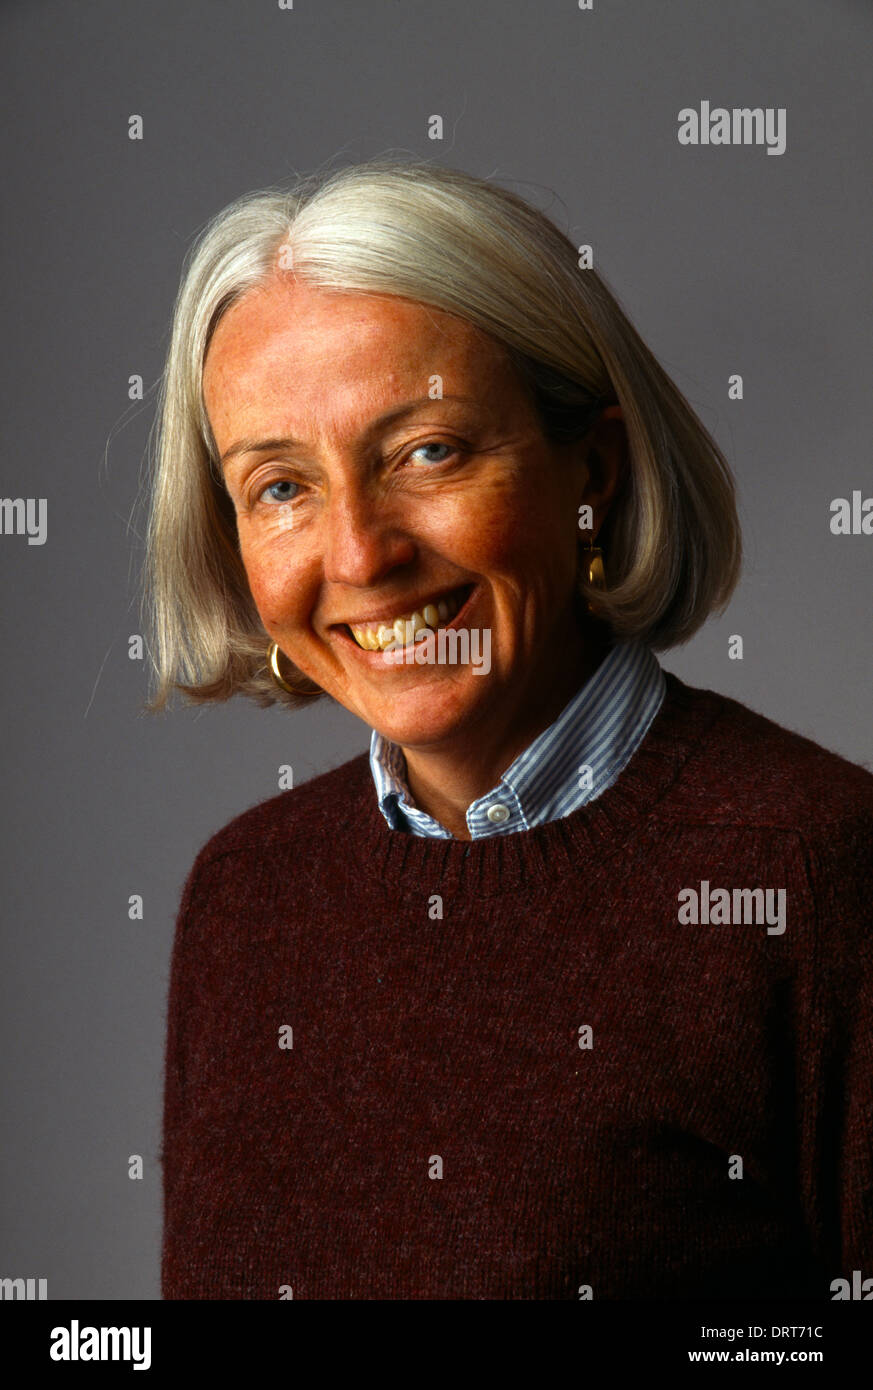 California USA Portrait Of A 60 Year Old Woman With Grey Hair Stock Photo -  Alamy